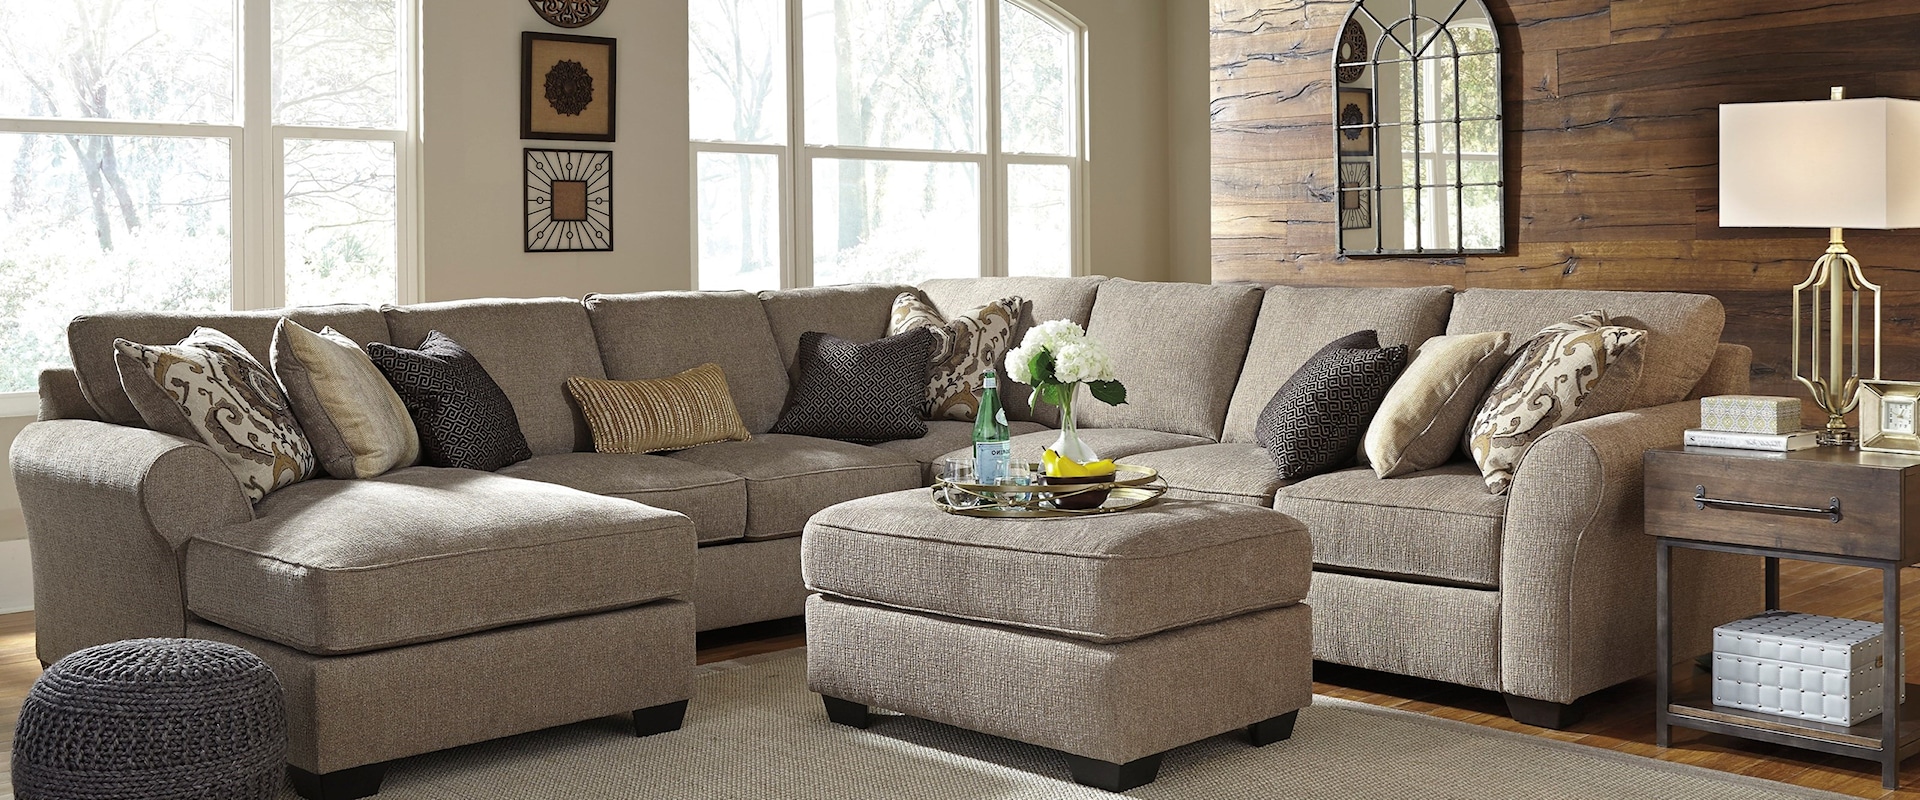 5-Piece Sectional with Ottoman